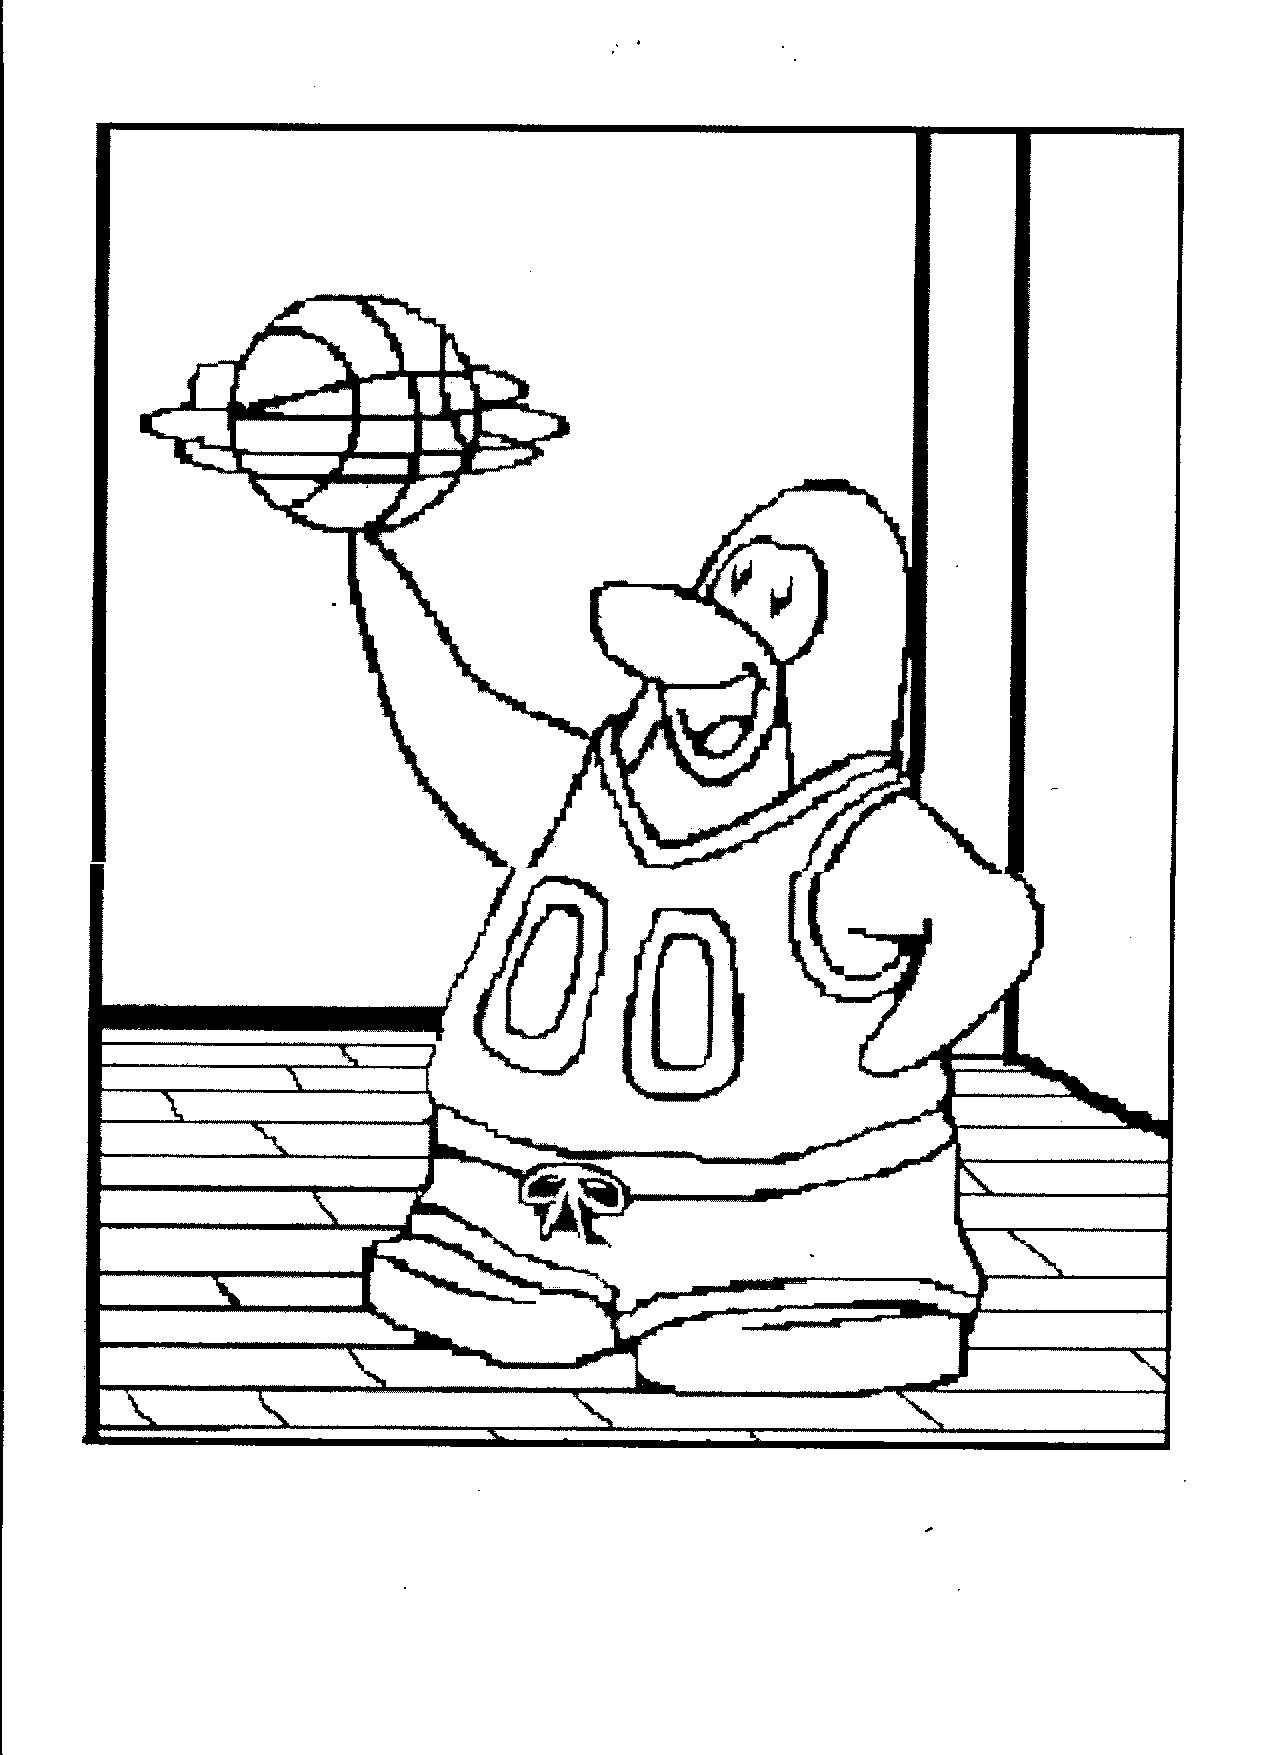 Club penguin coloring pages to download and print for free